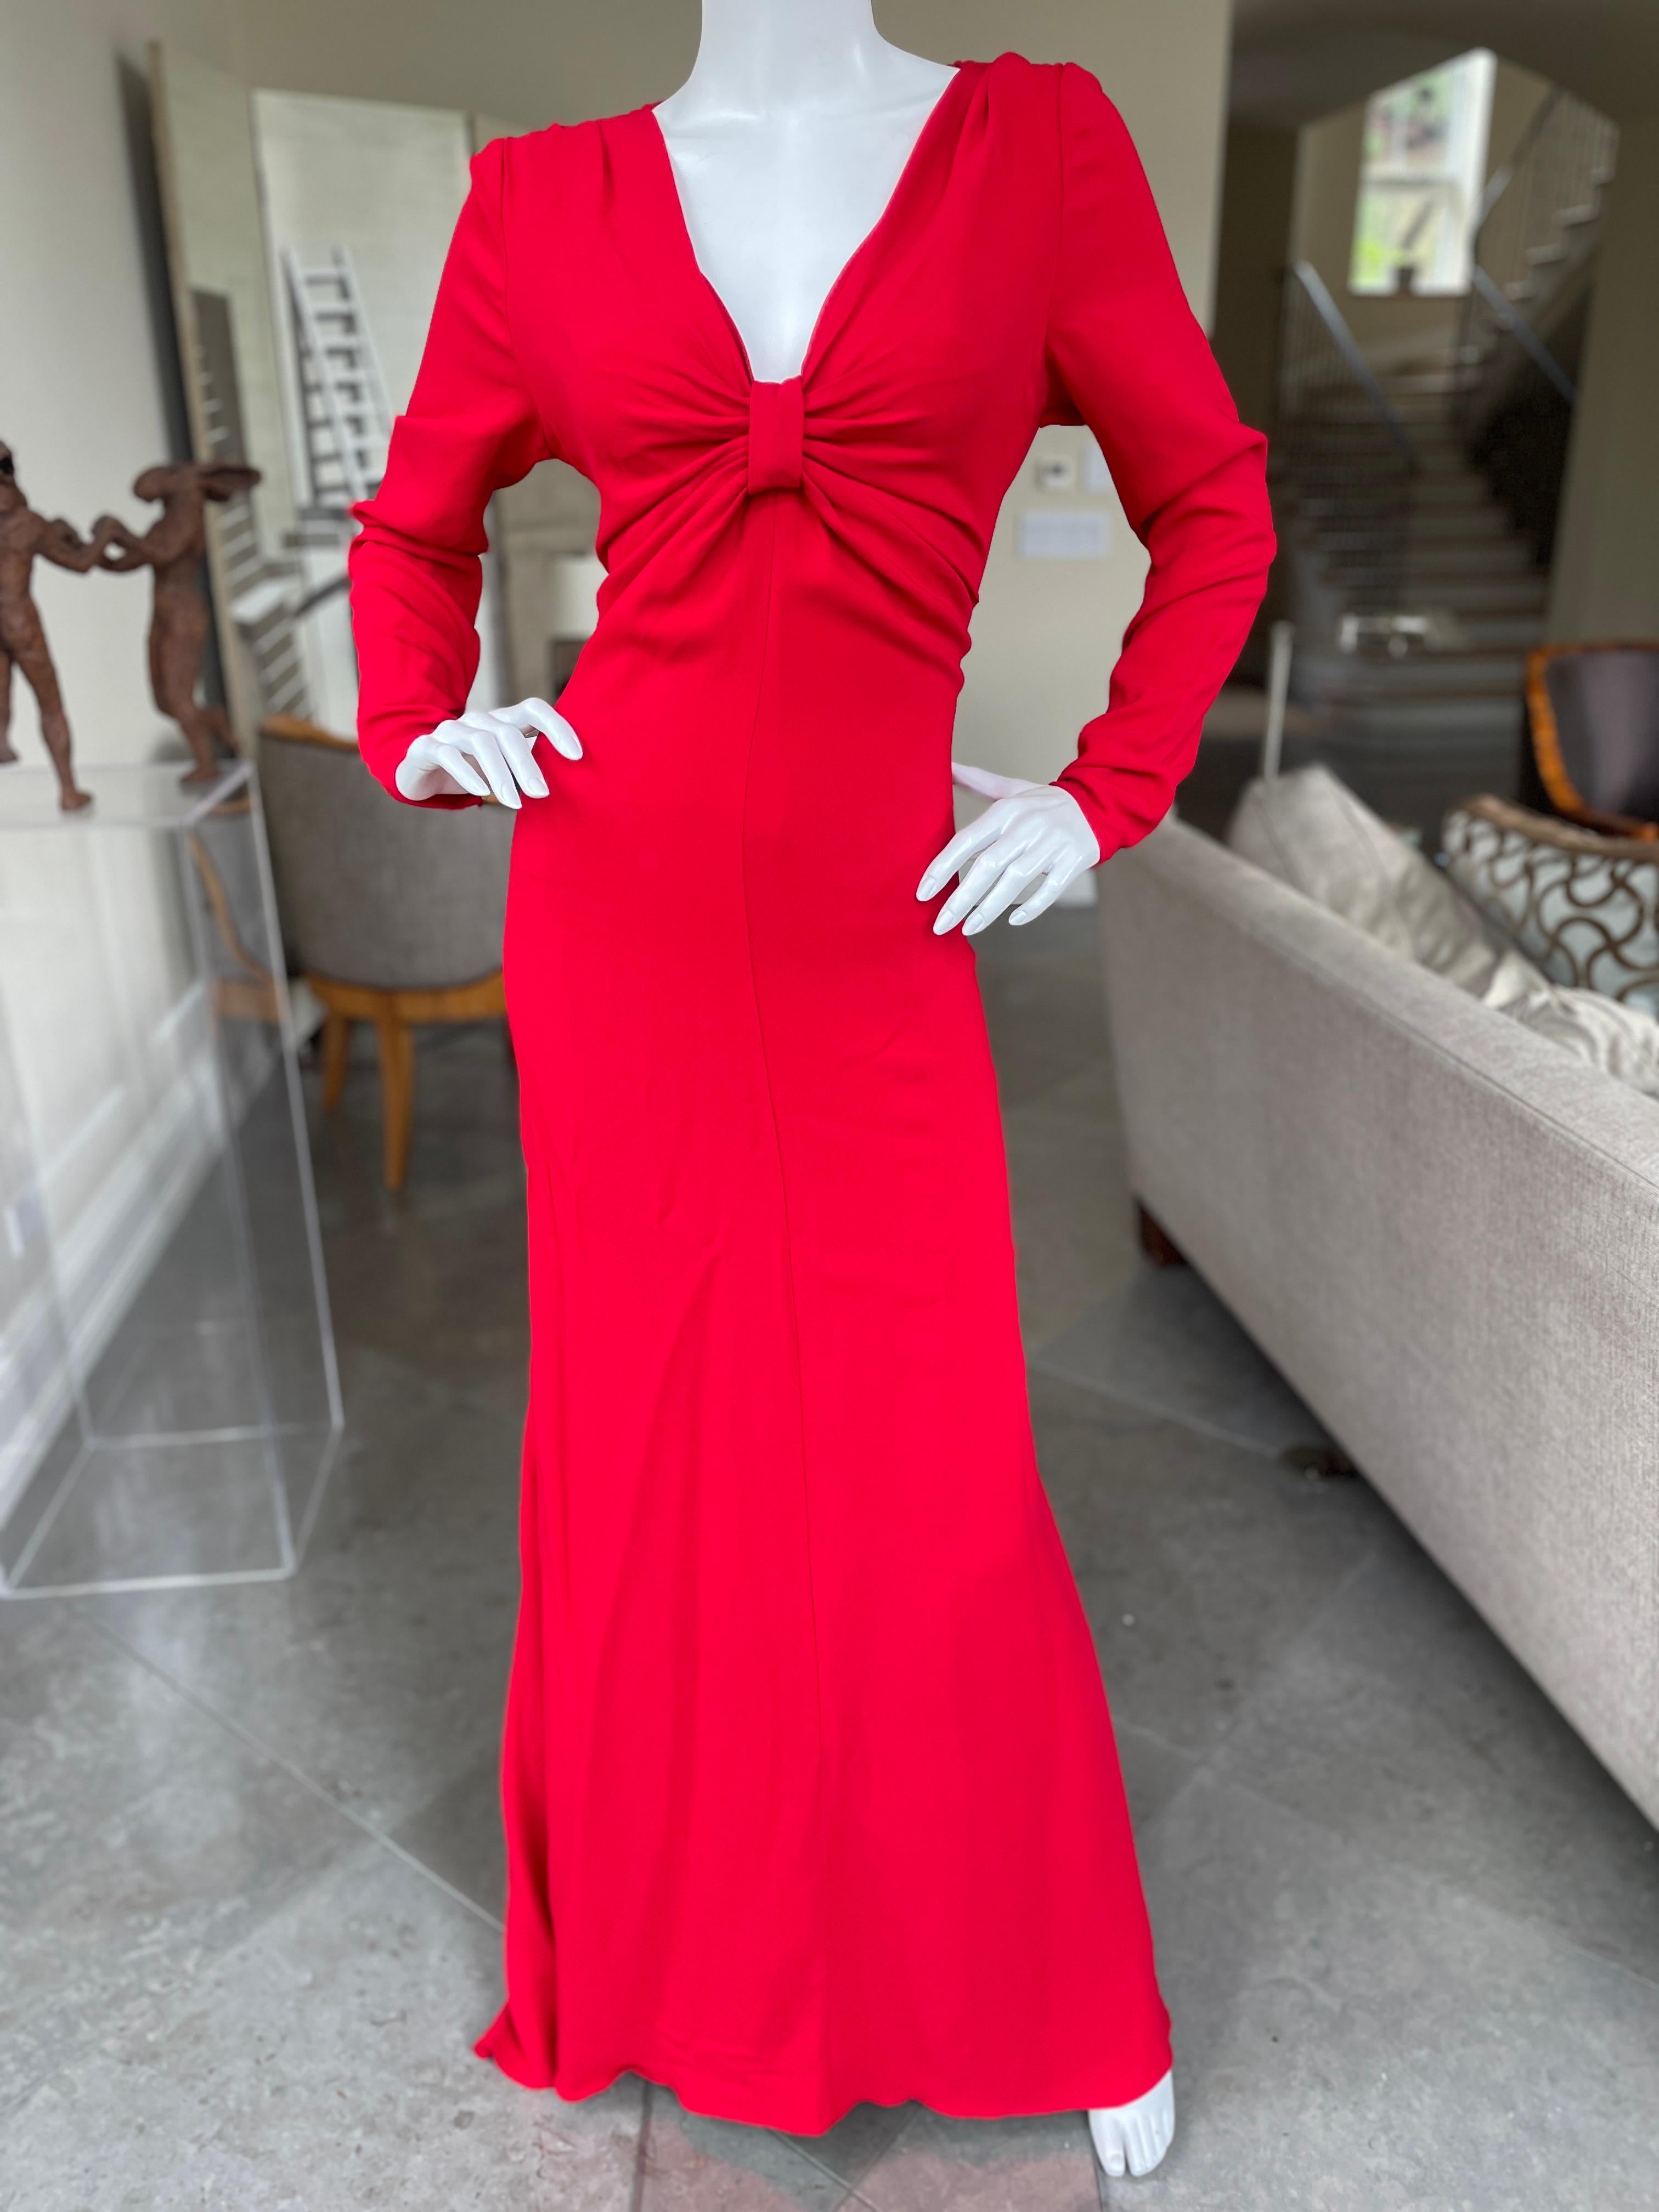 Valentino Vintage 1980's Plunging Red Crepe Evening Dress in Generous Size 12
        There is a lot of stretch, please refer to measurements.
This pools on the floor, and has not been shortened, it is 65